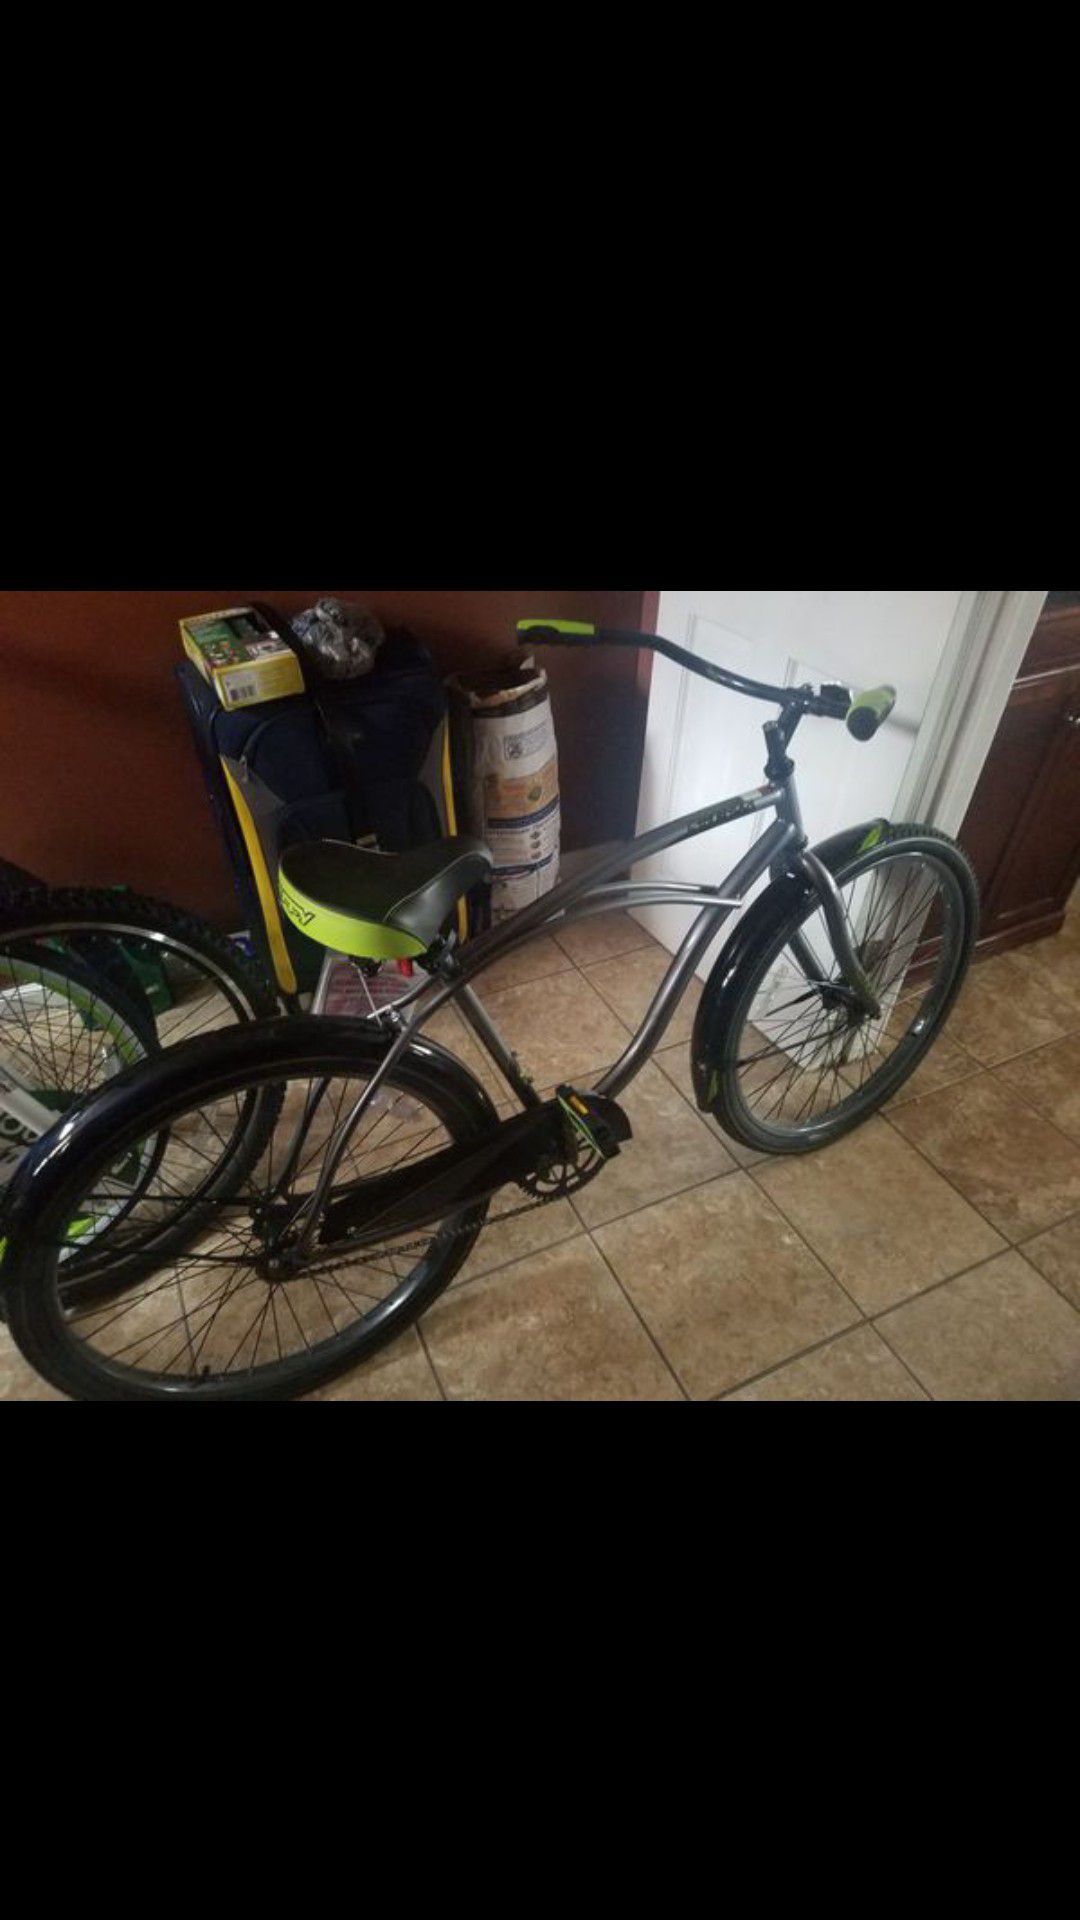 new 26" huffy bike cranbook cruiser green and gray color